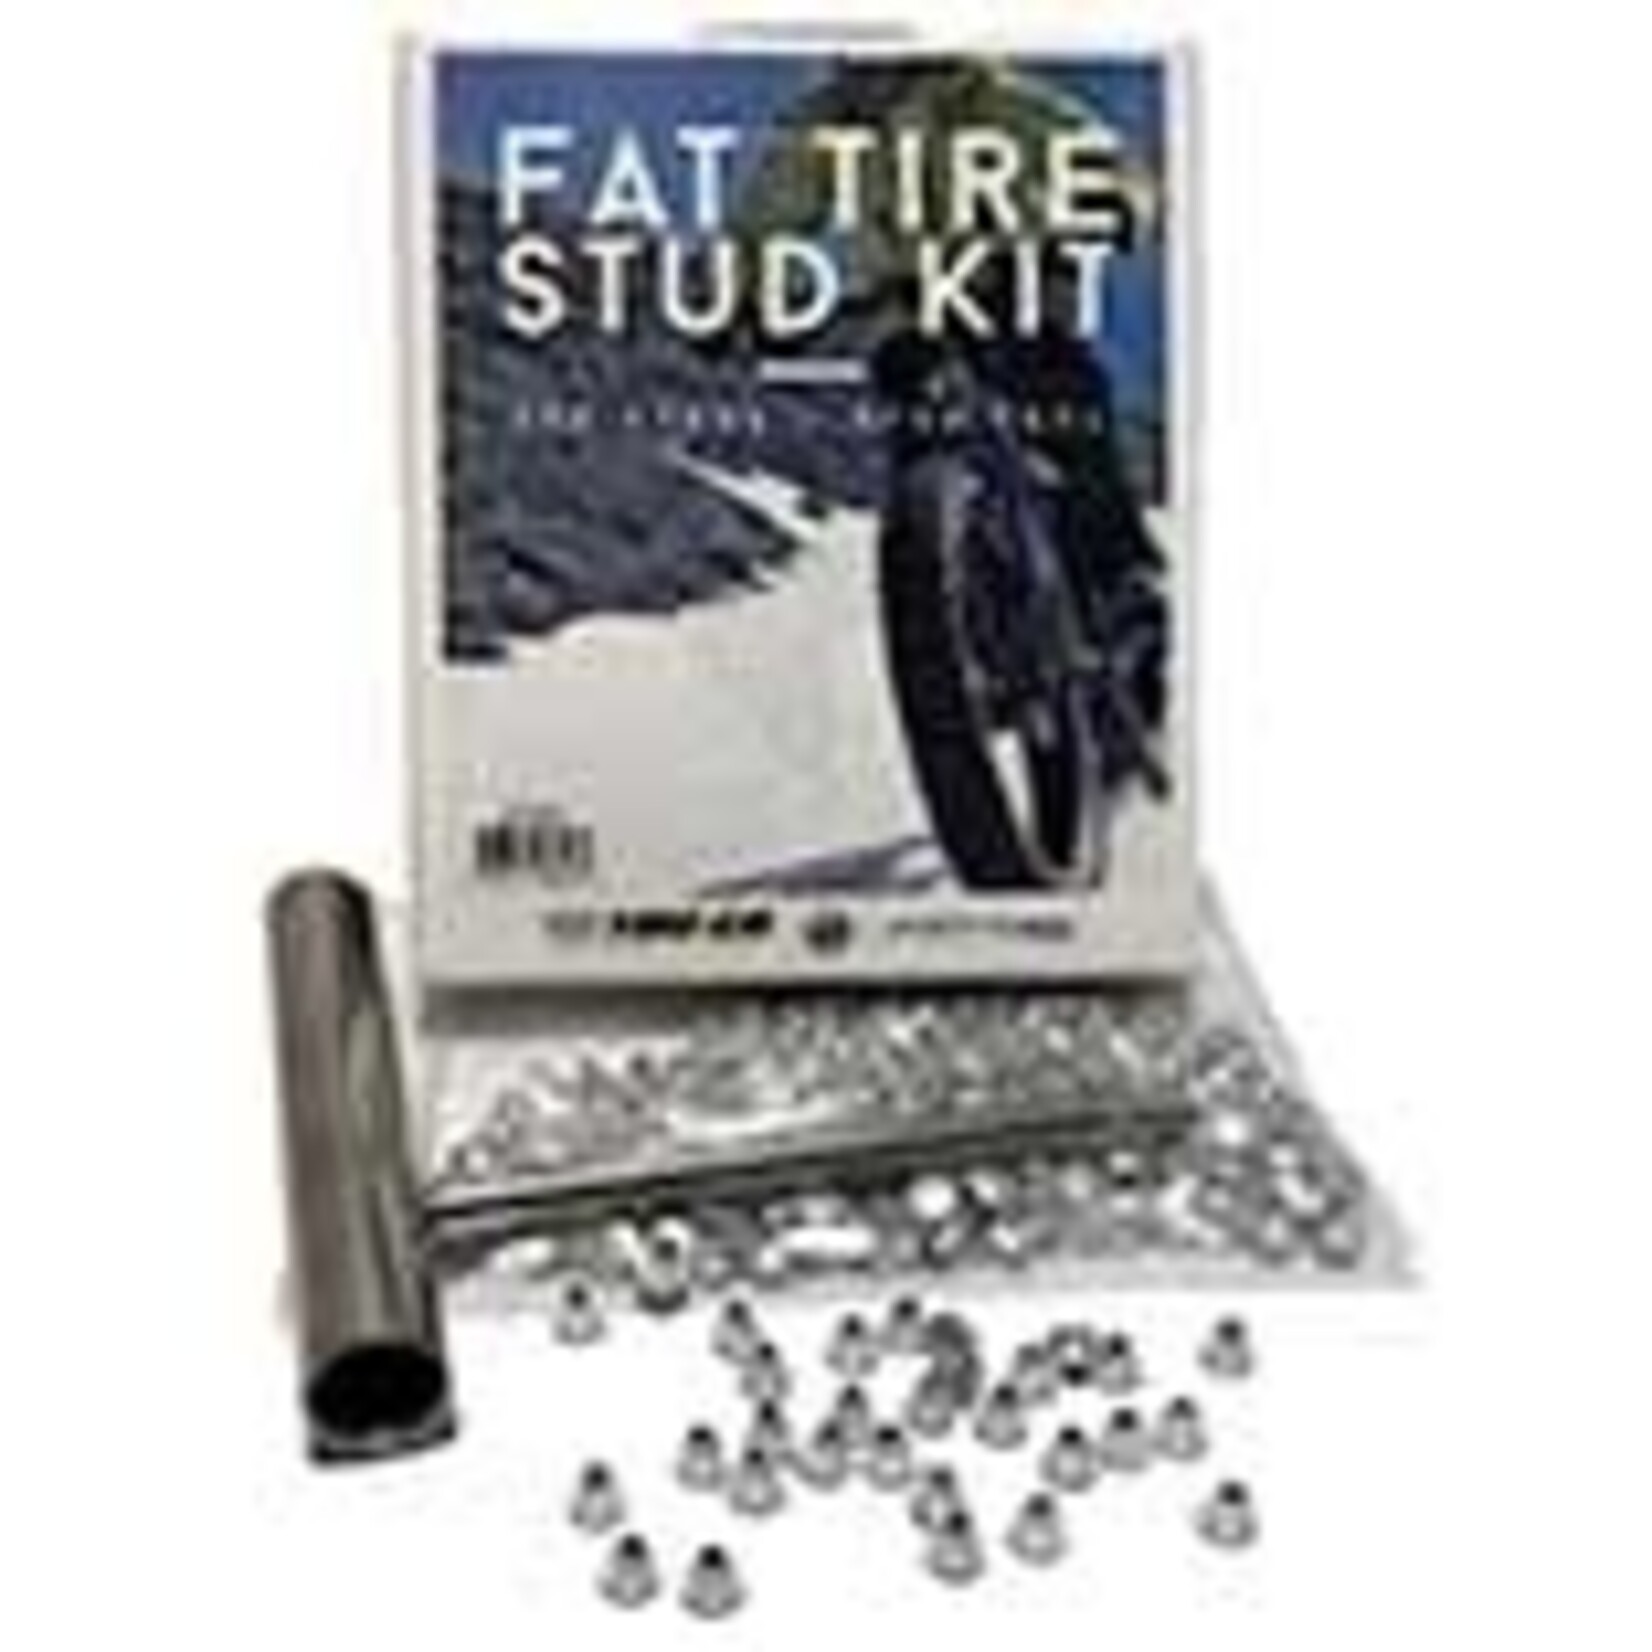 Vee Rubber Stud kit with tool, Tire